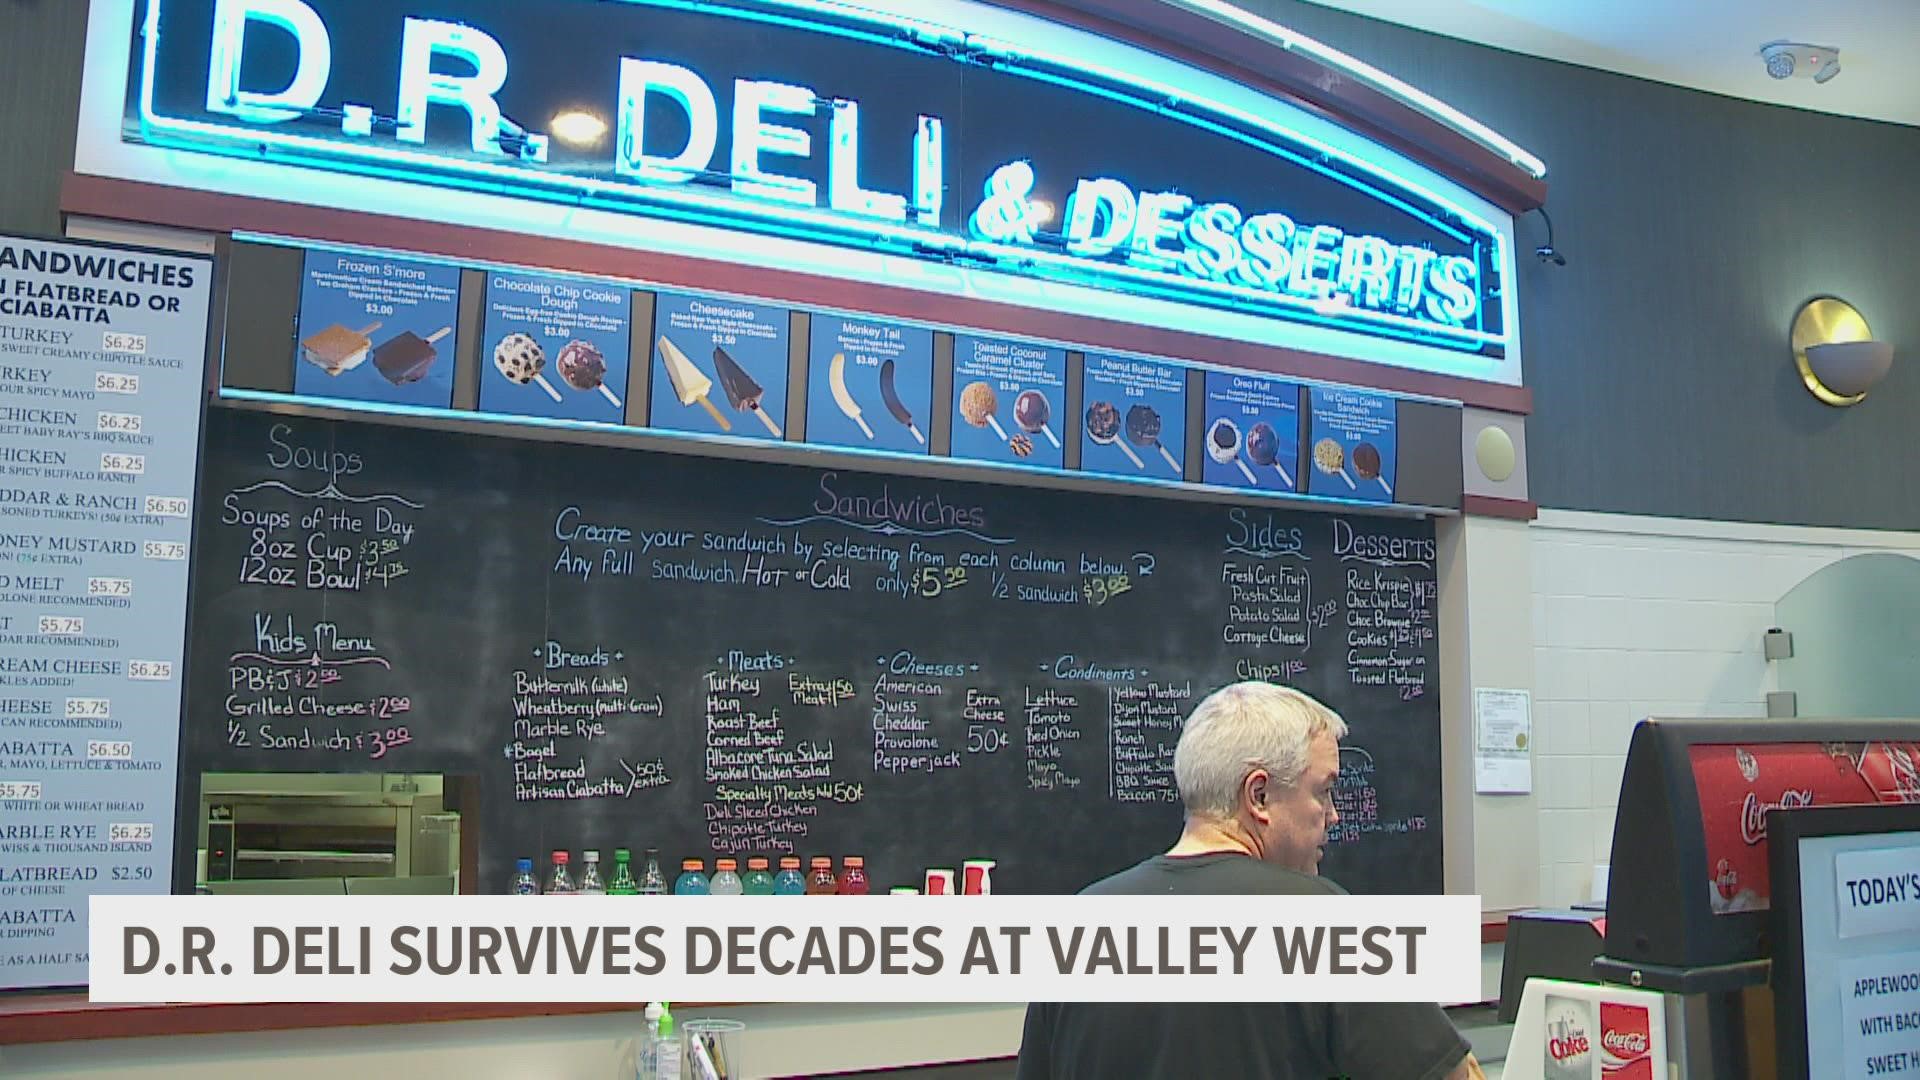 D.R. Deli owner Darin Mitchell says the business has survived thanks to its great products and loyal customers.